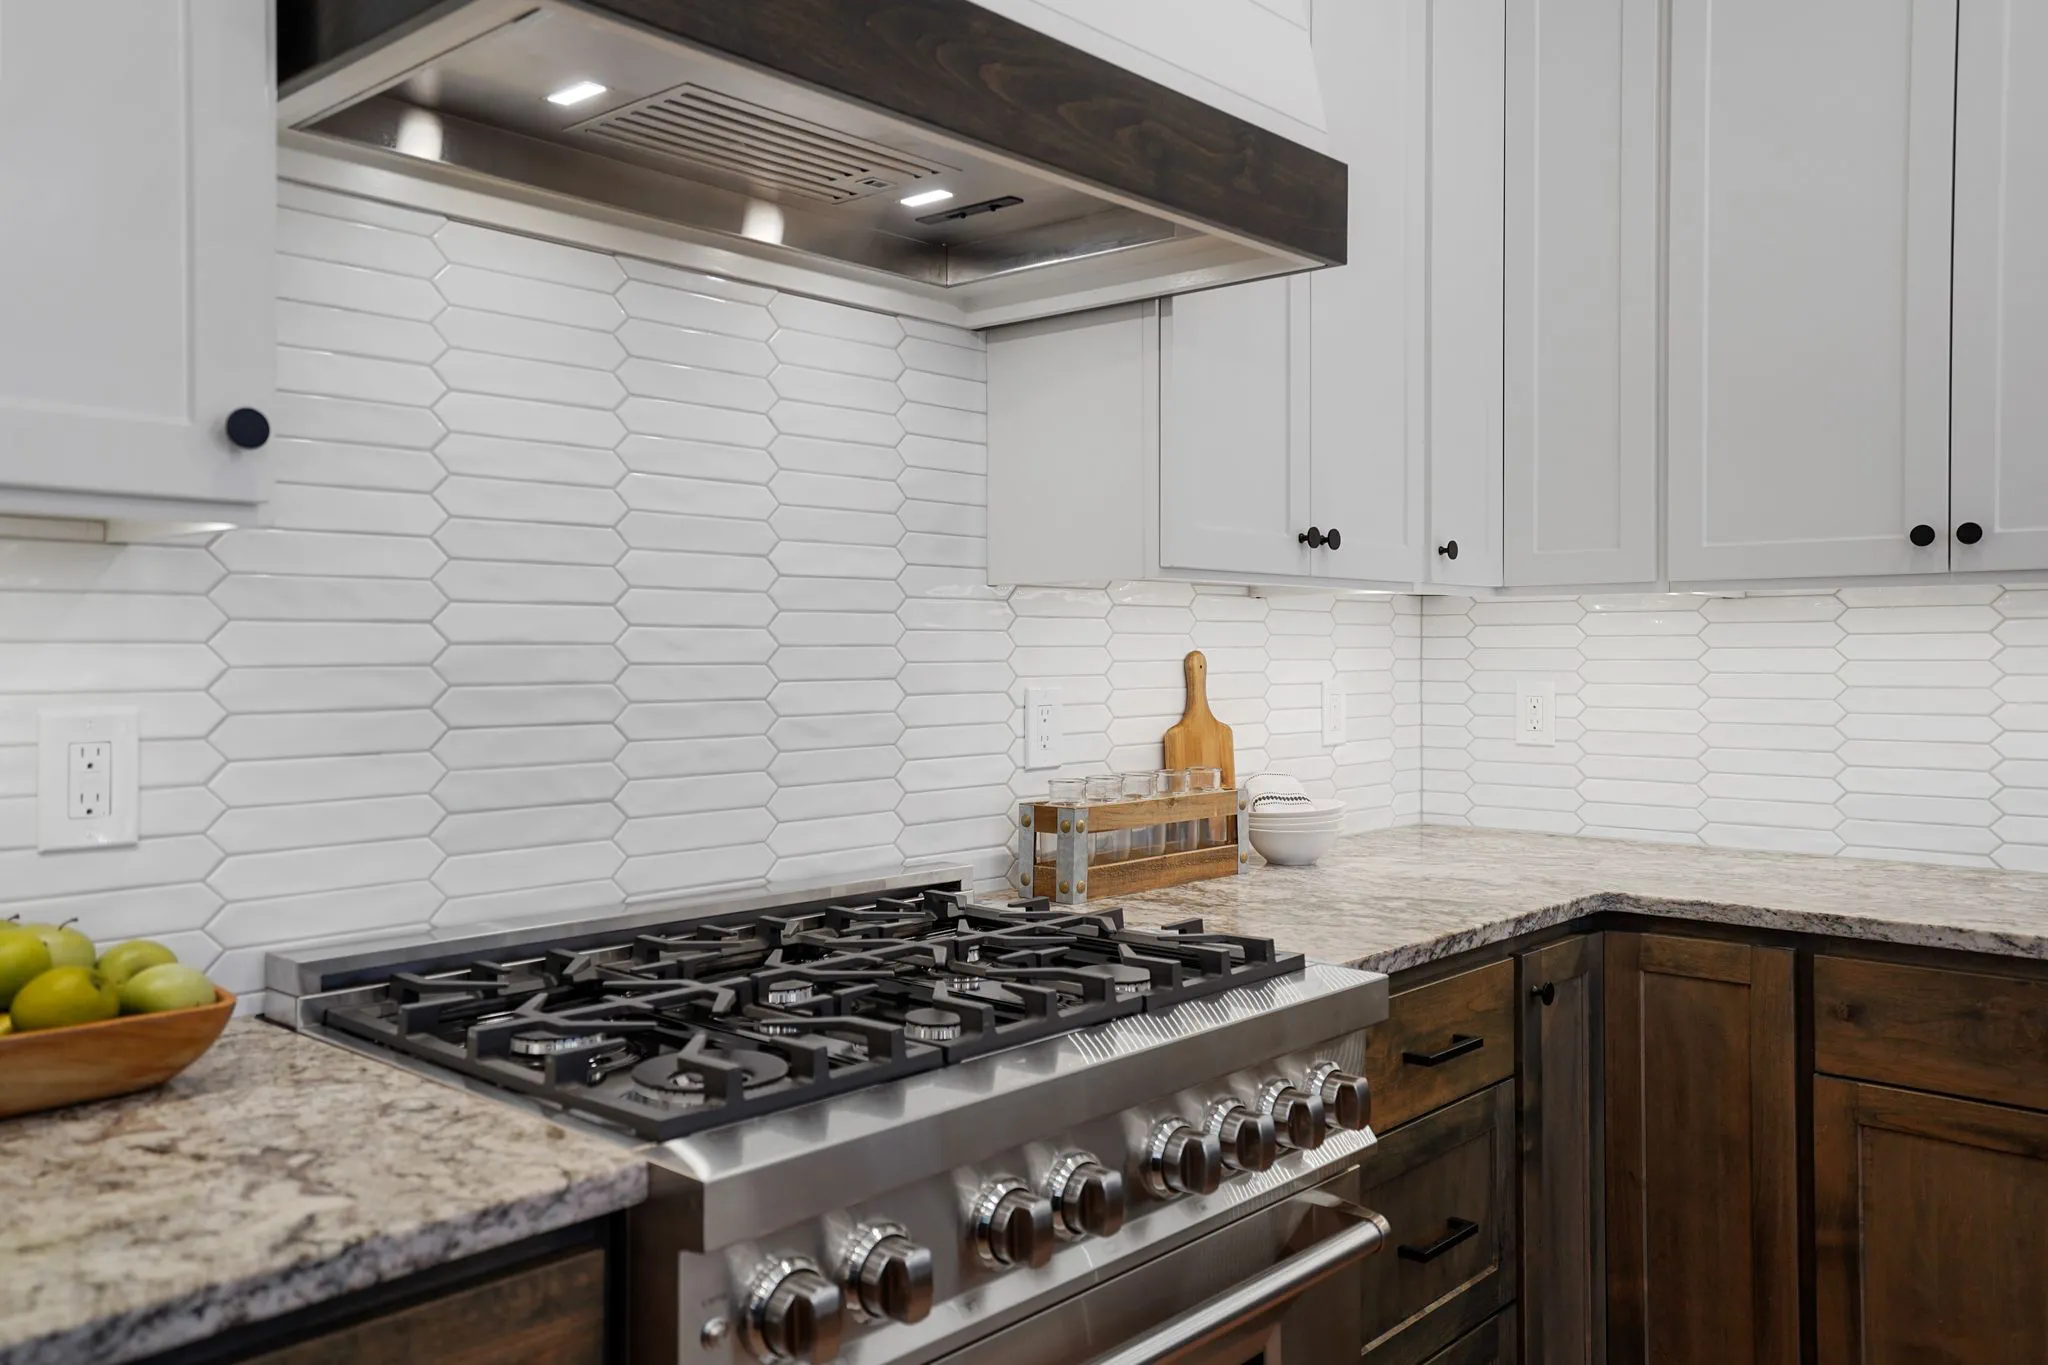 Kitchen Gas Stove With White Tile Backsplash And Plenty Of Counter Space